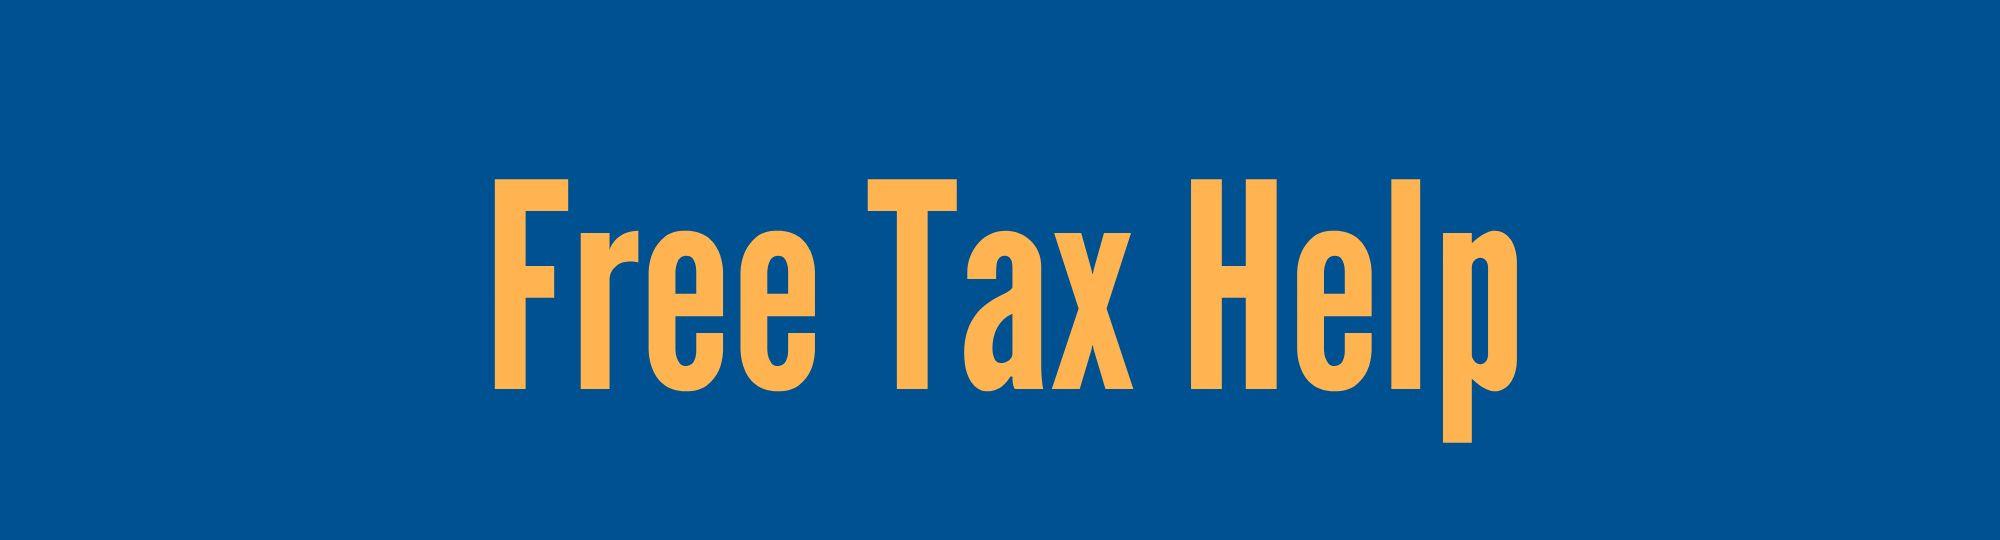 Tax assistance available